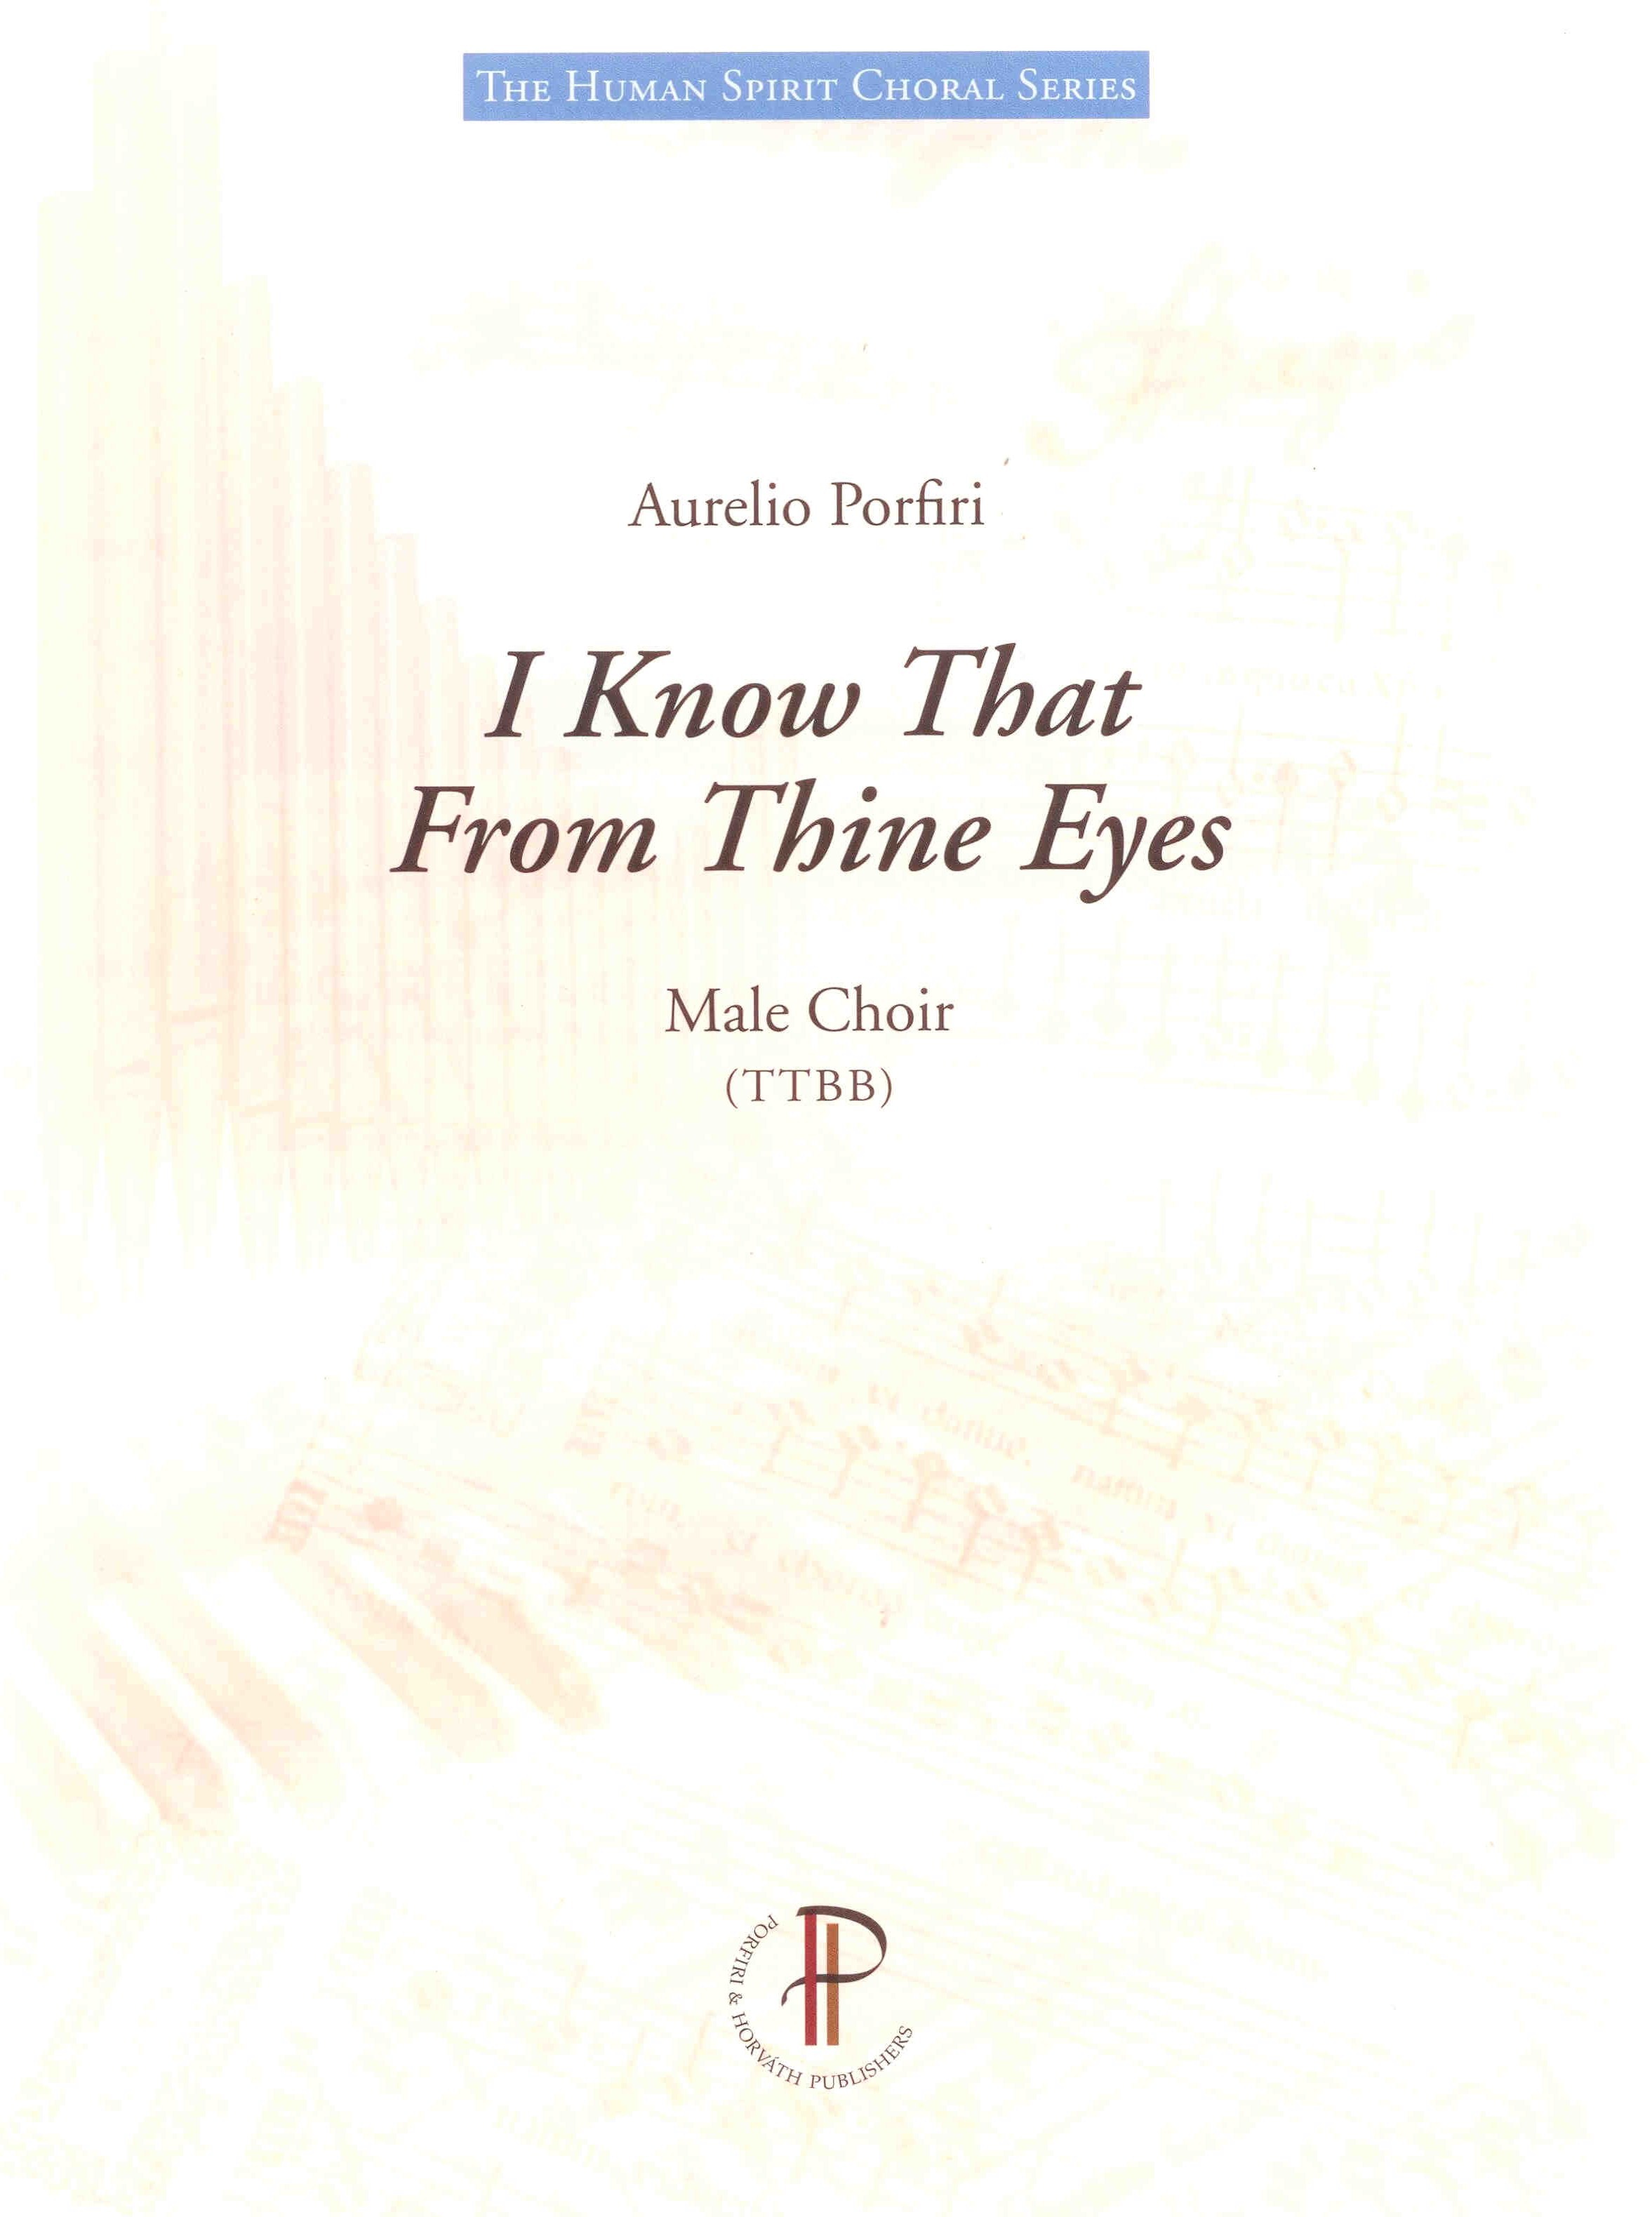 I know that from thine eyes - Show sample score